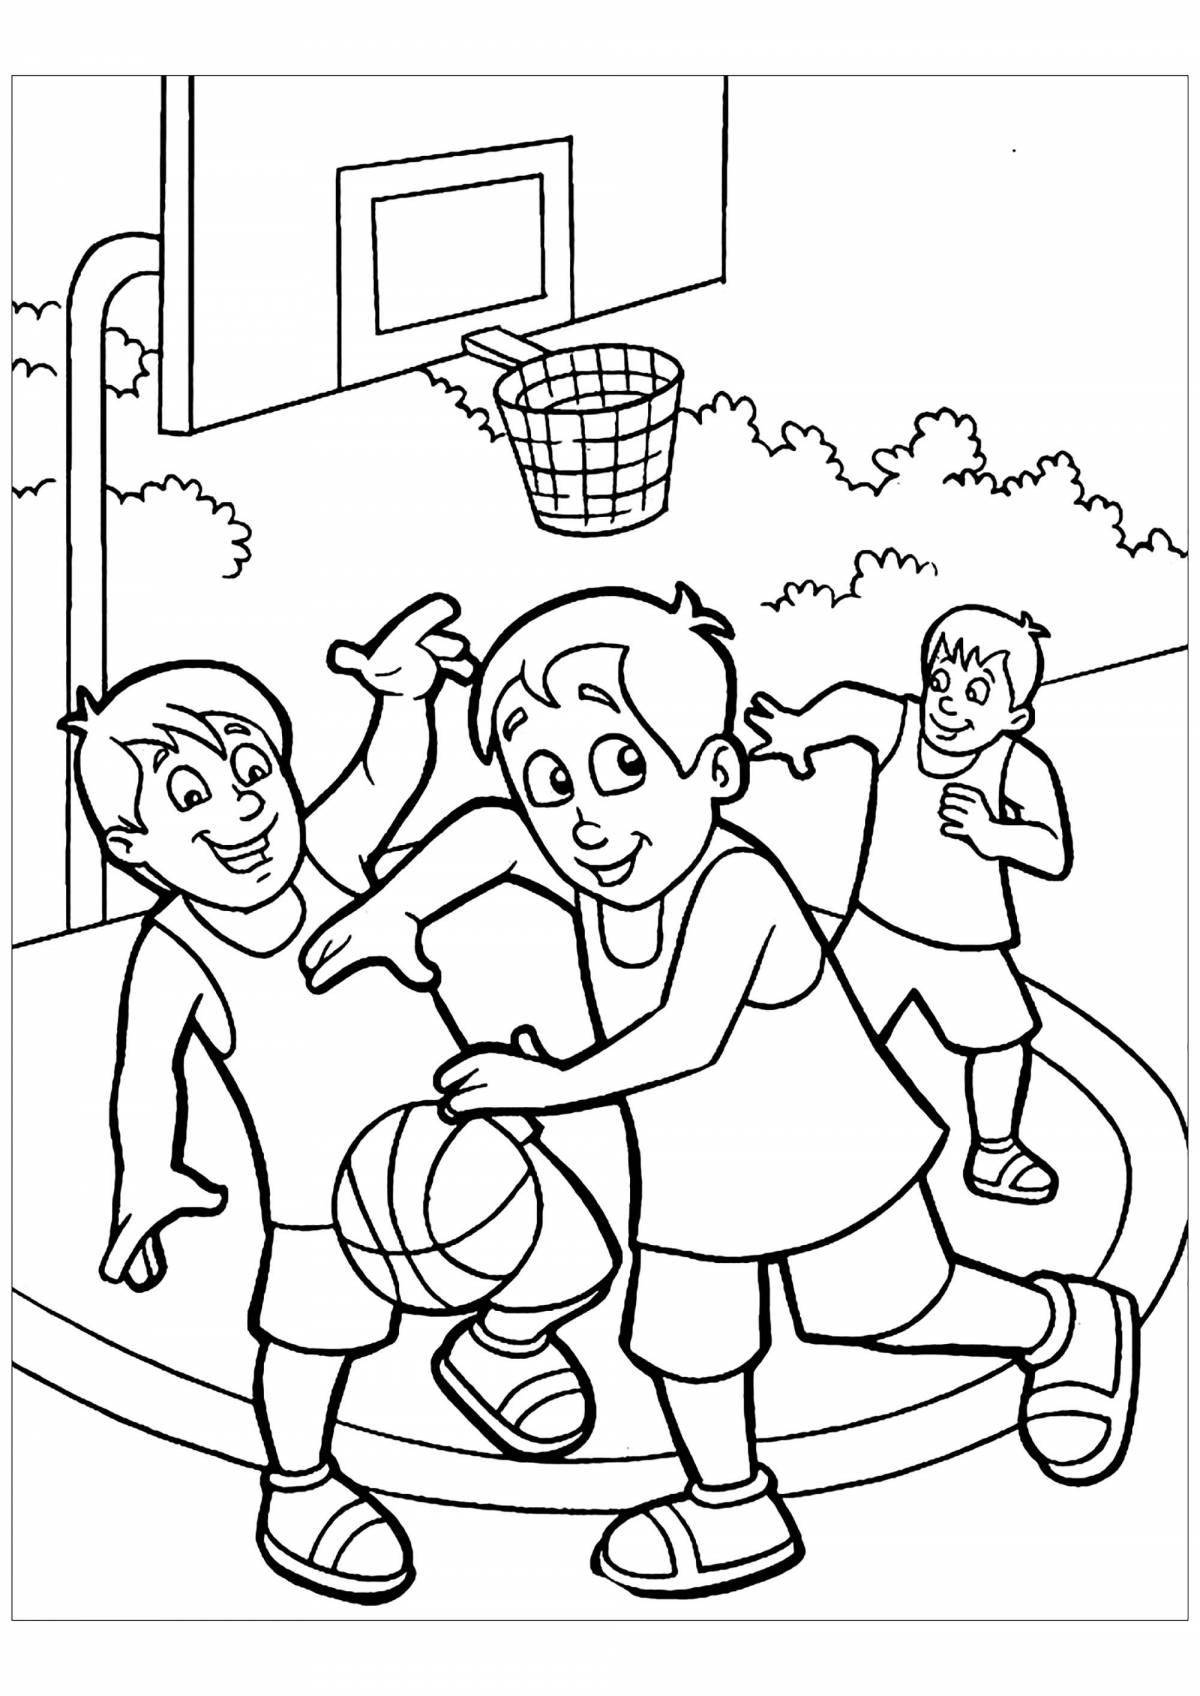 Awesome sports coloring pages for kids